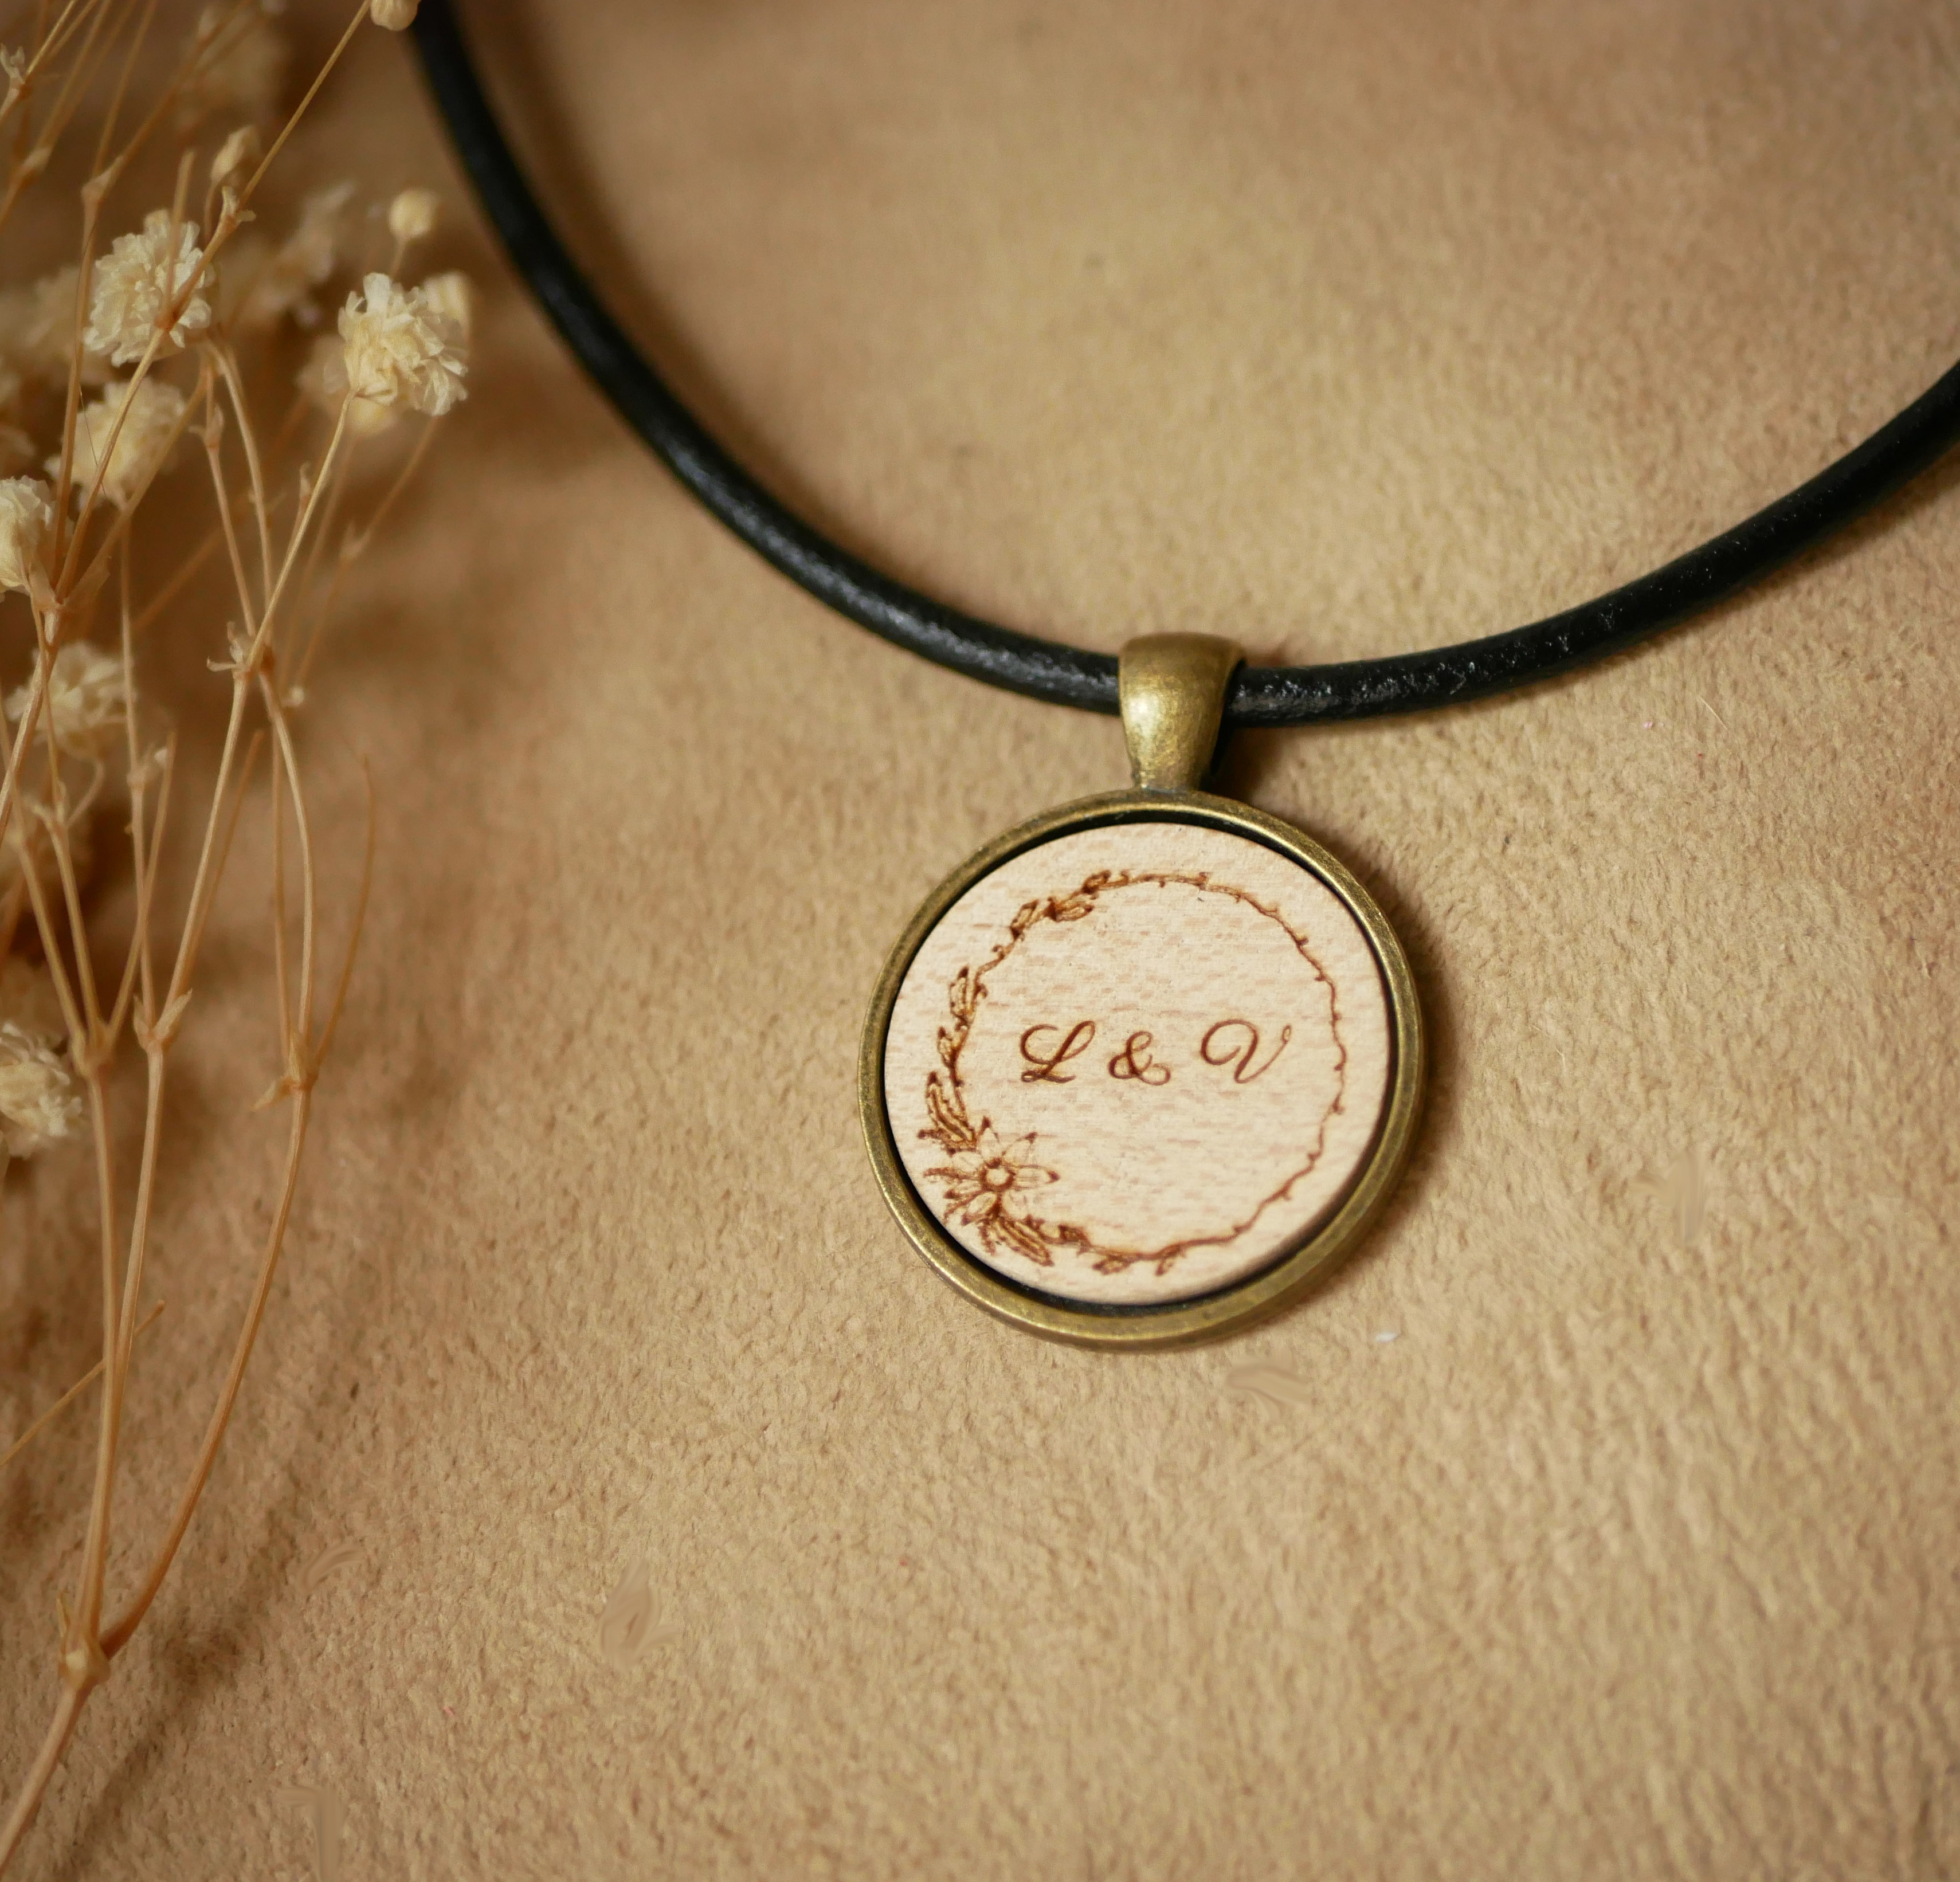 Leather necklace with engraved wood cabochon pendant set in antique brass to personalize